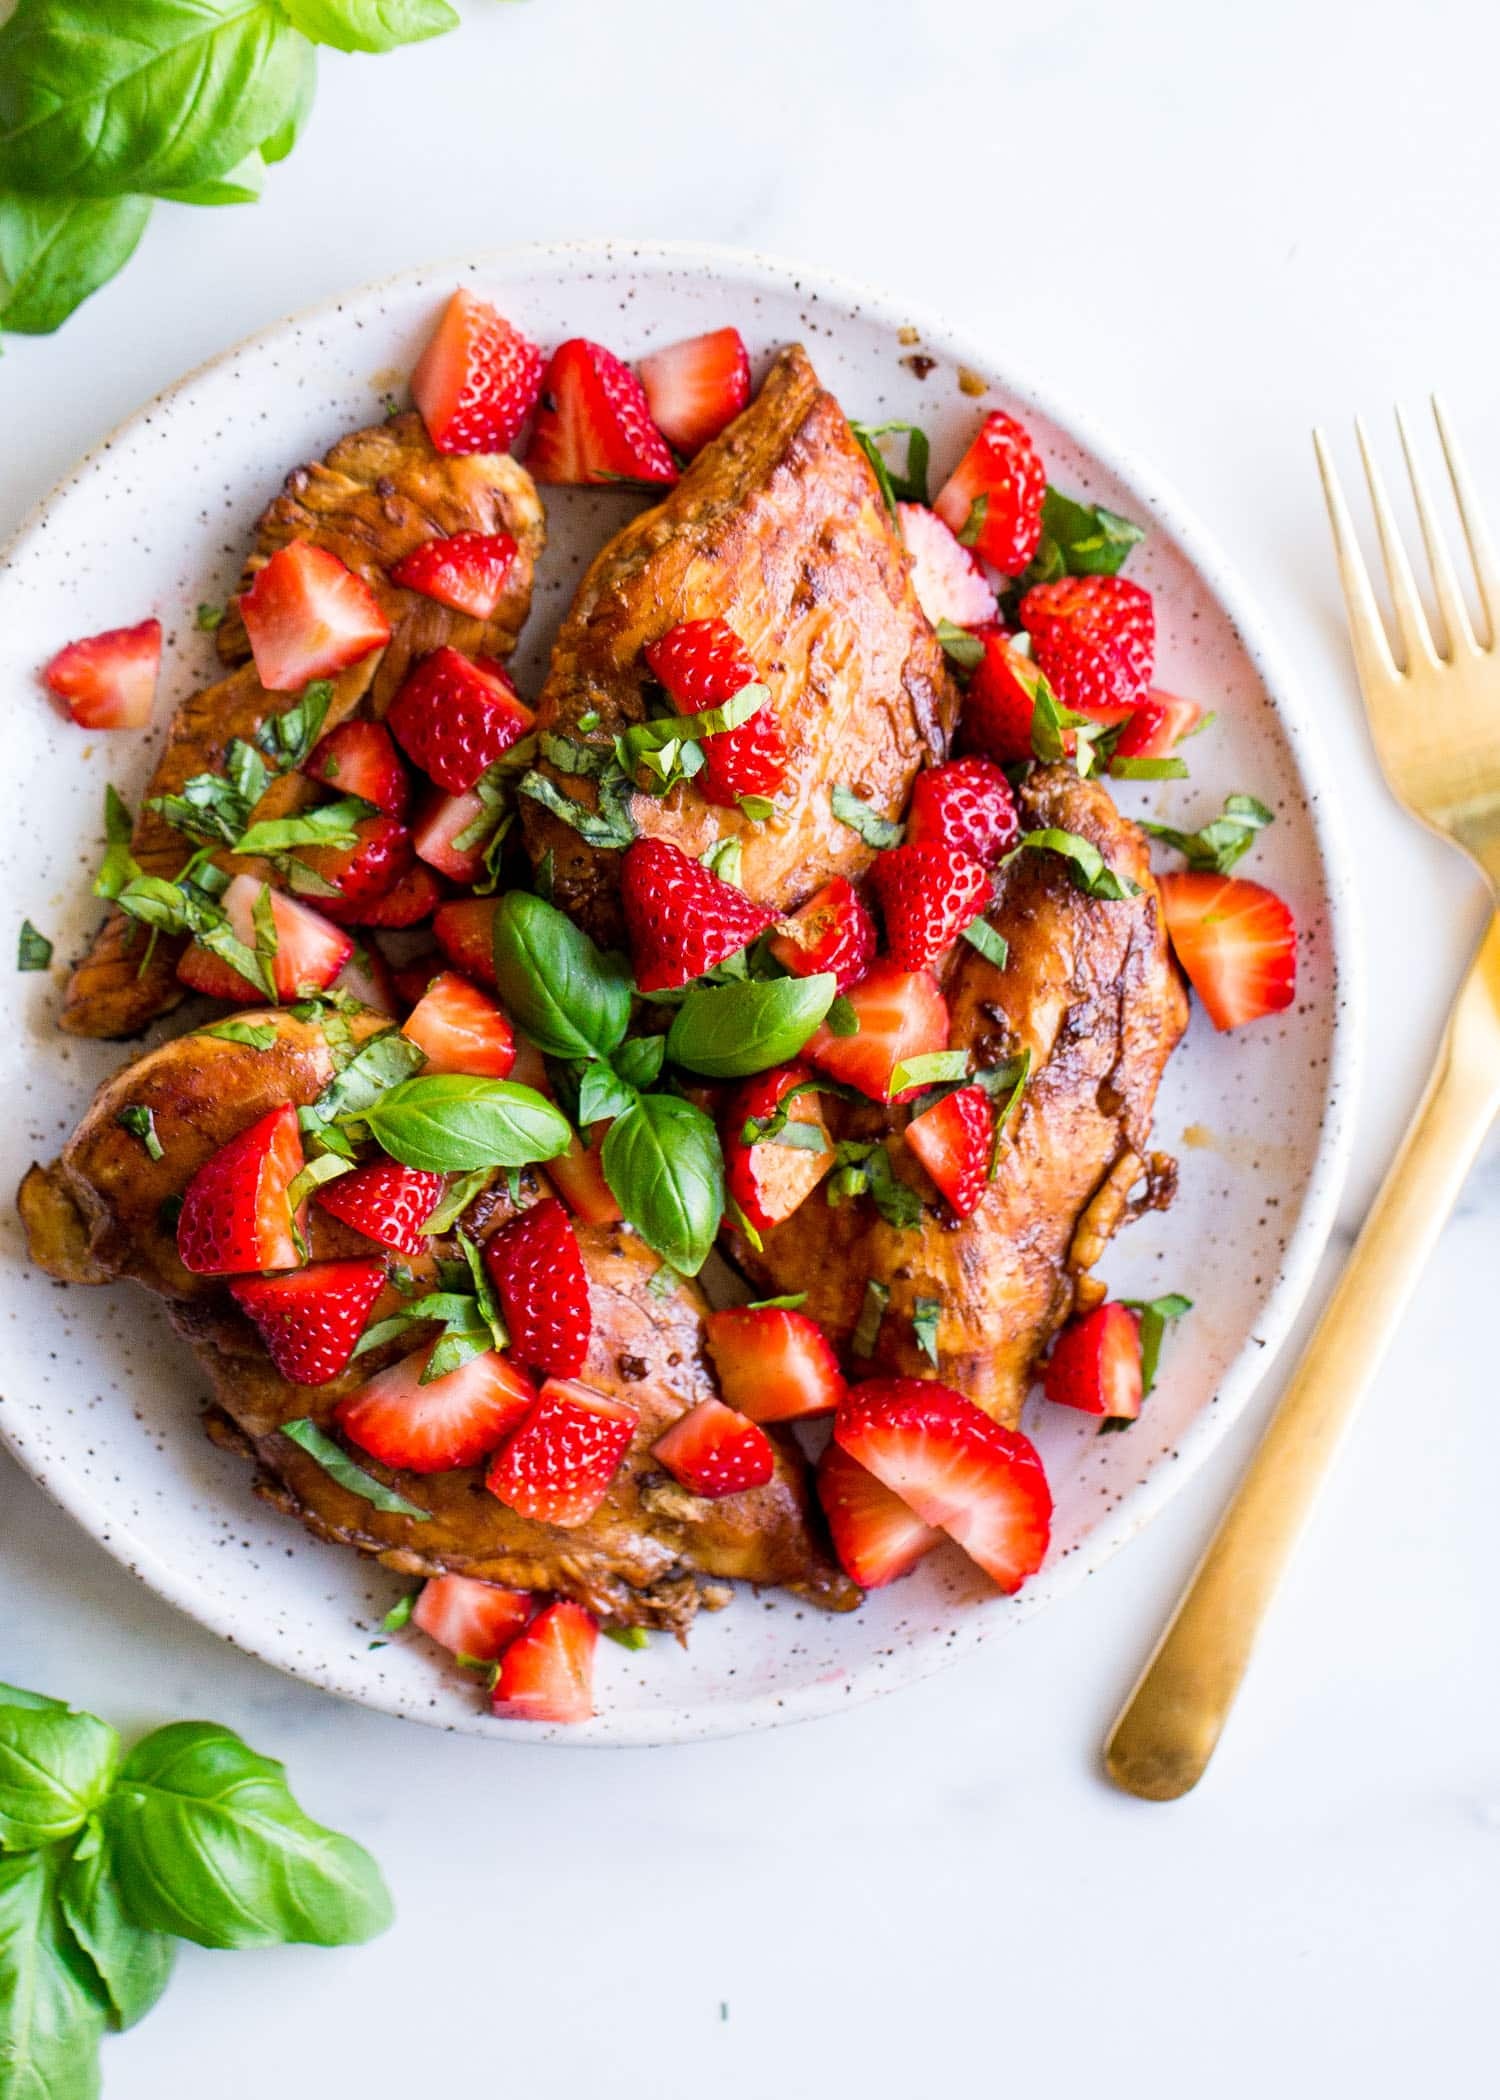 HD wallpaper, Phone Hd Strawberry Wallpaper Image, Strawberry, Basil Chicken, Wholesomelicious, Food, 1500X2100 Hd Phone